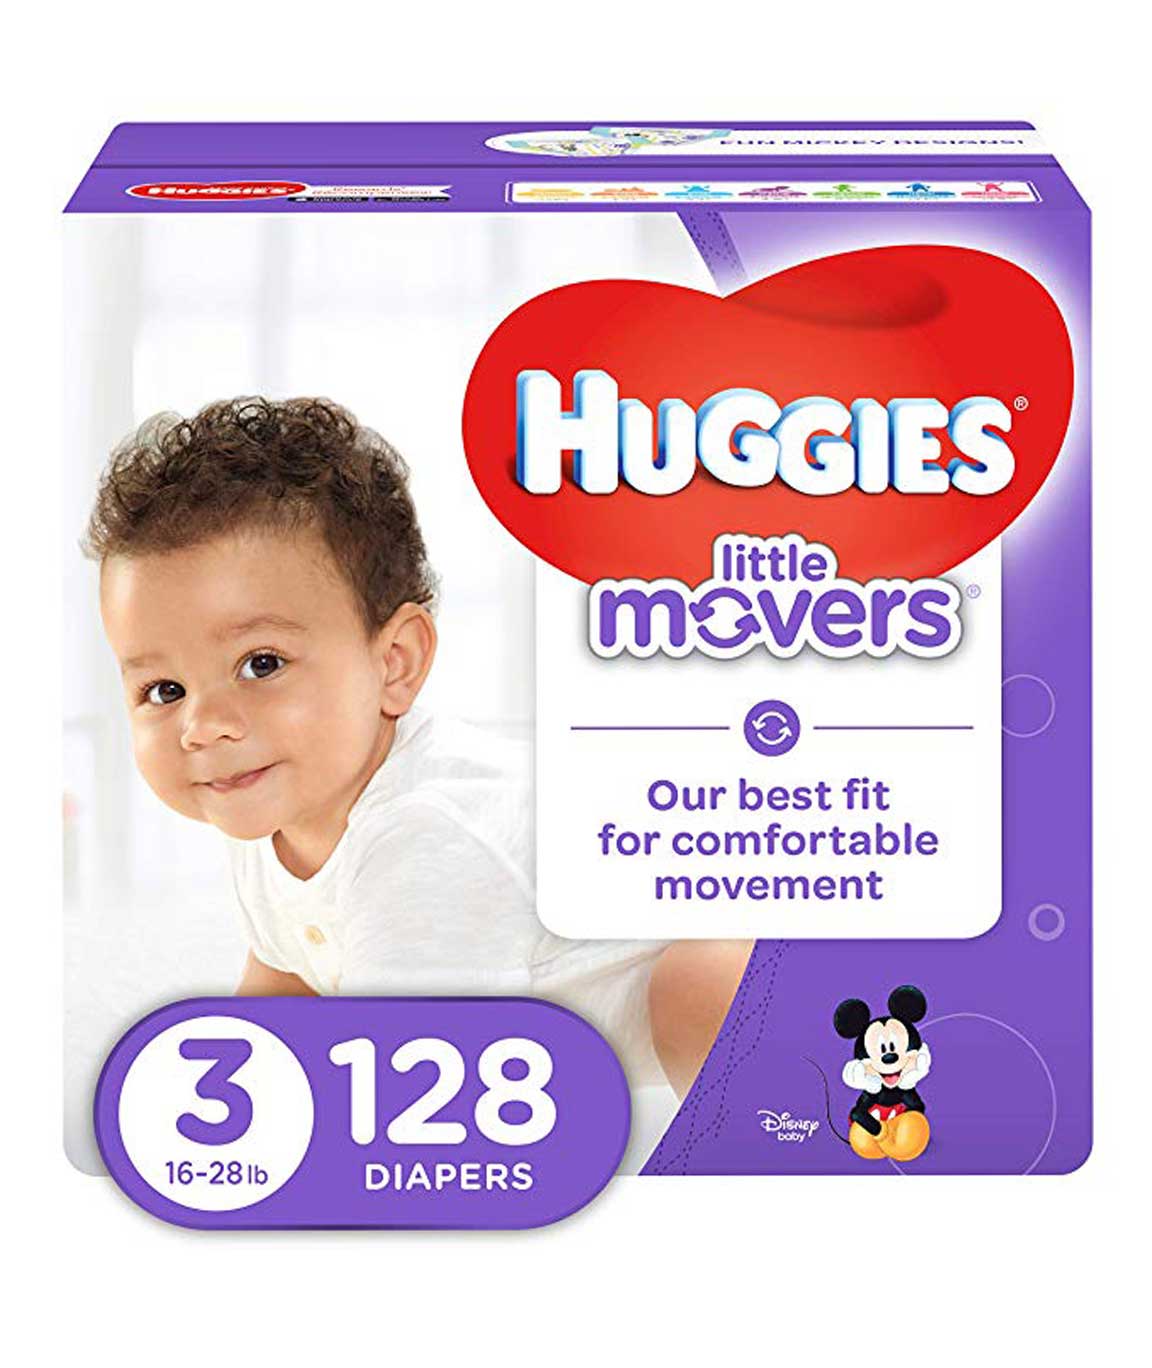 Huggies Little Movers Diapers, Size 3, 128 Count (Packaging May Vary)